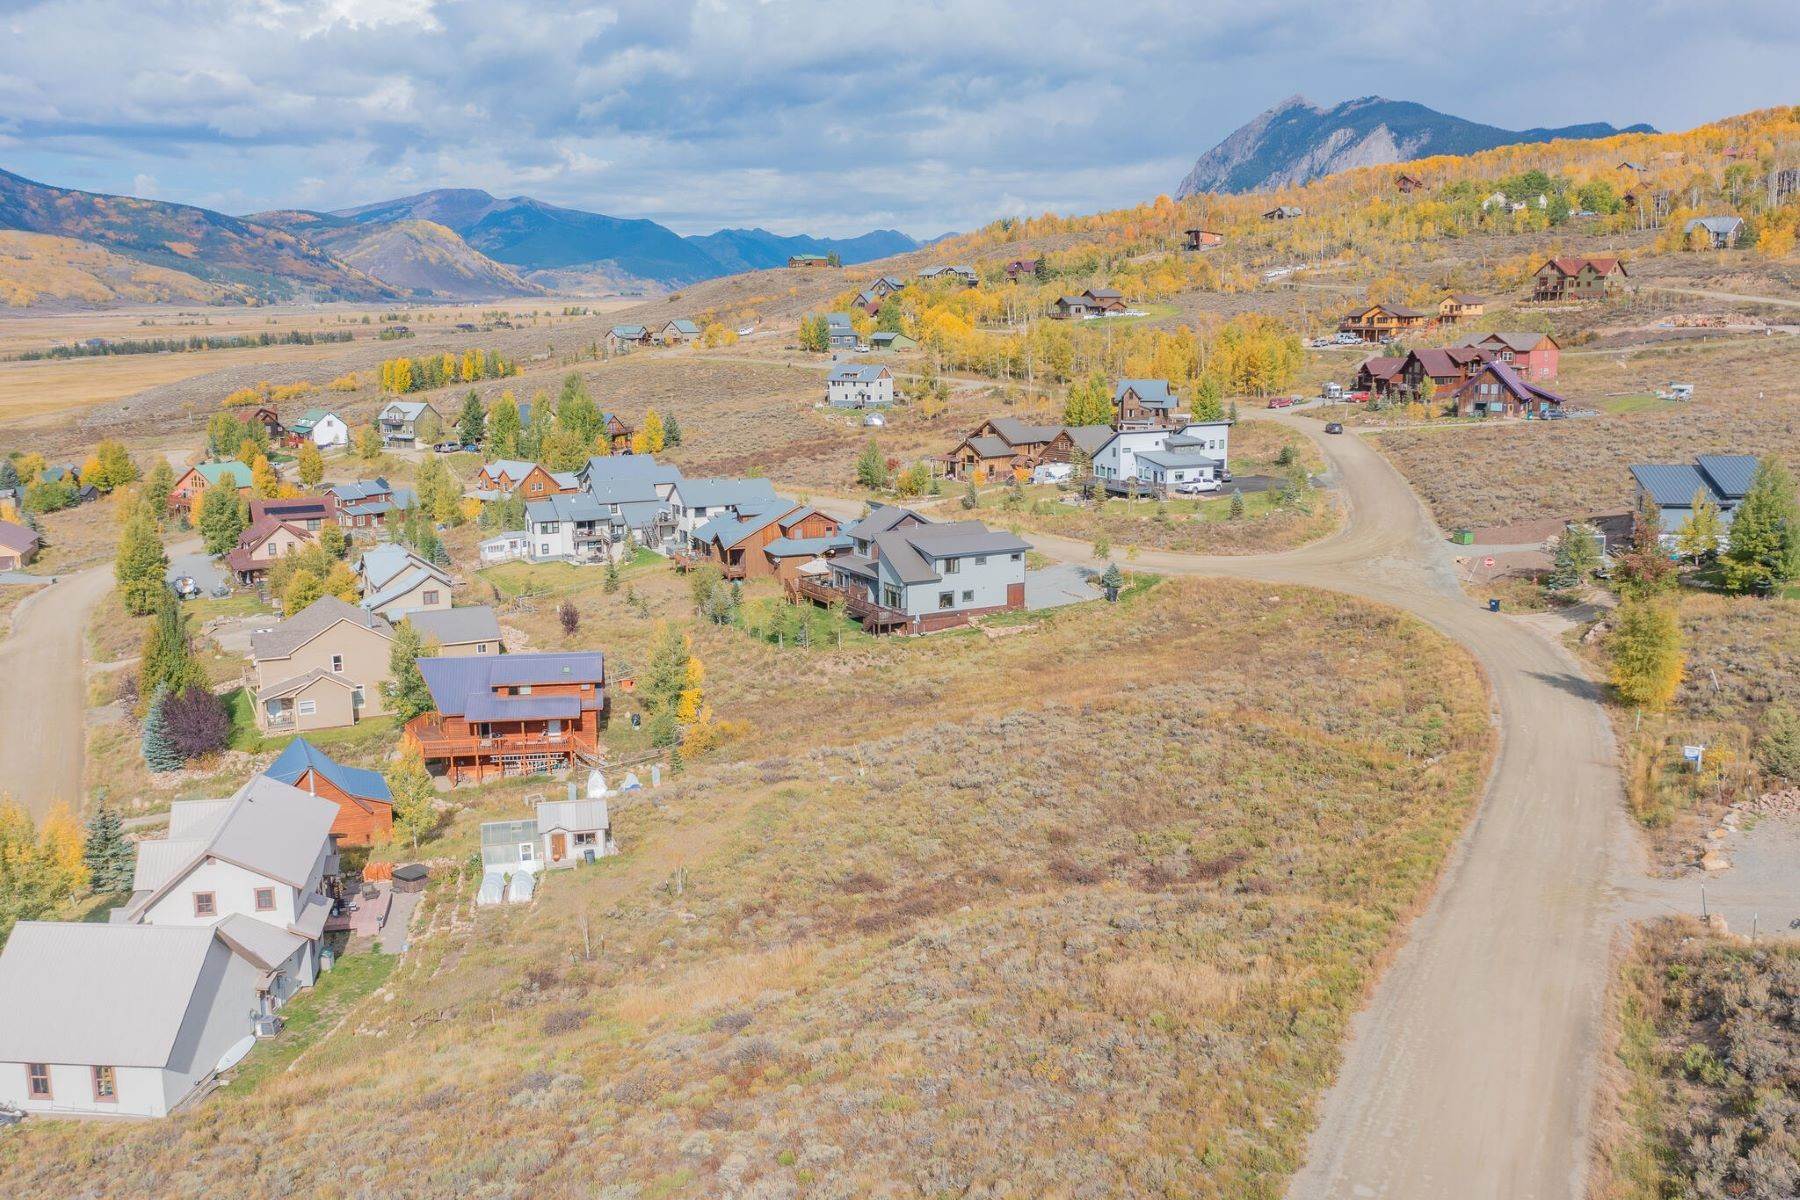 Property for Active at Lot in Crested Butte South 324 Zeligman Street Crested Butte, Colorado 81224 United States